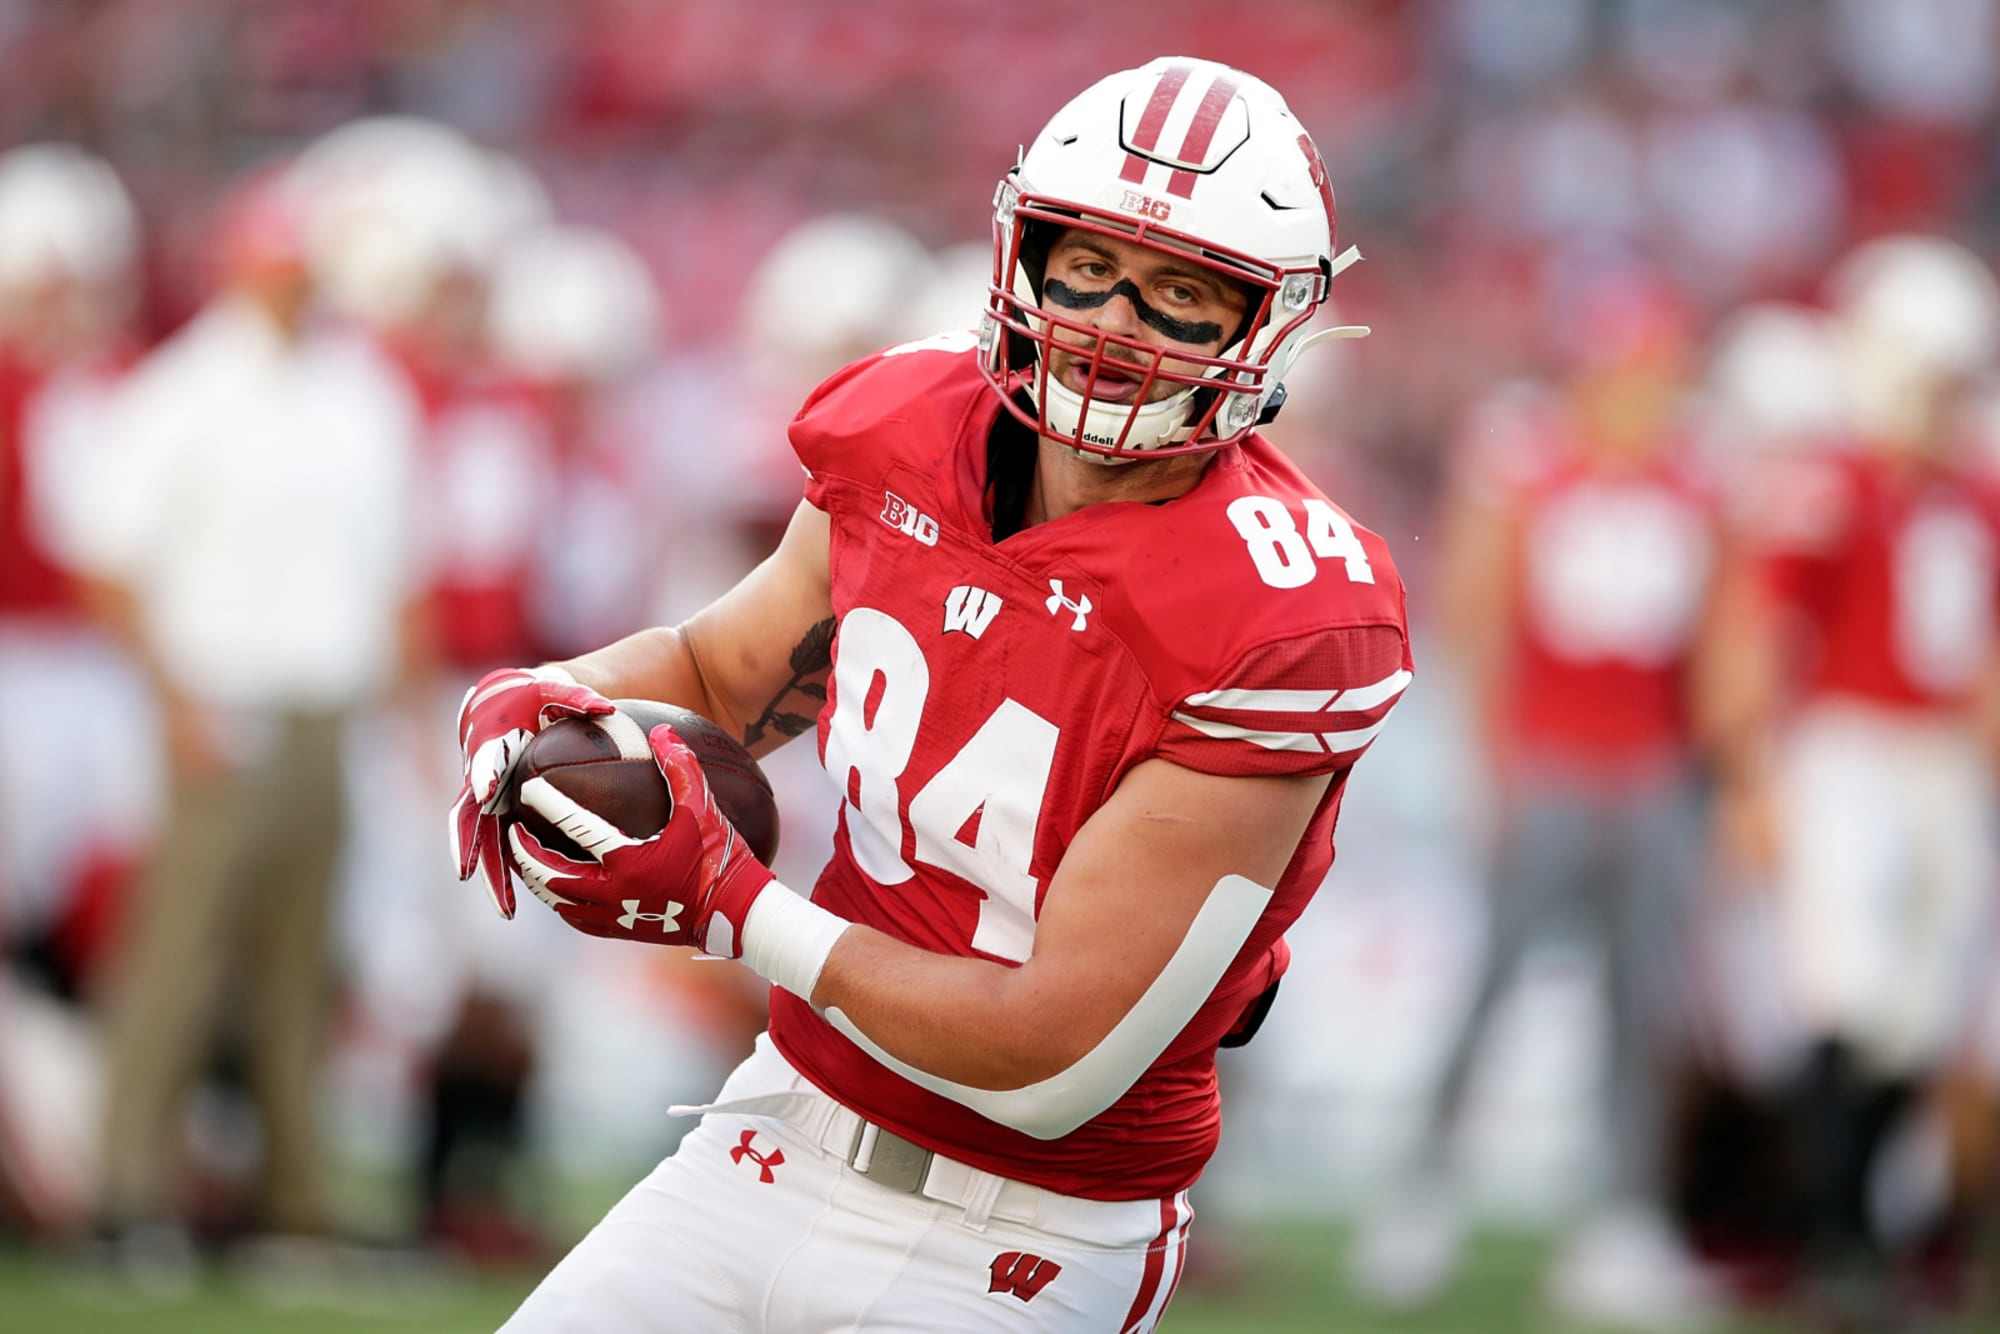 Wisconsin tight end Jake Ferguson had solid debut